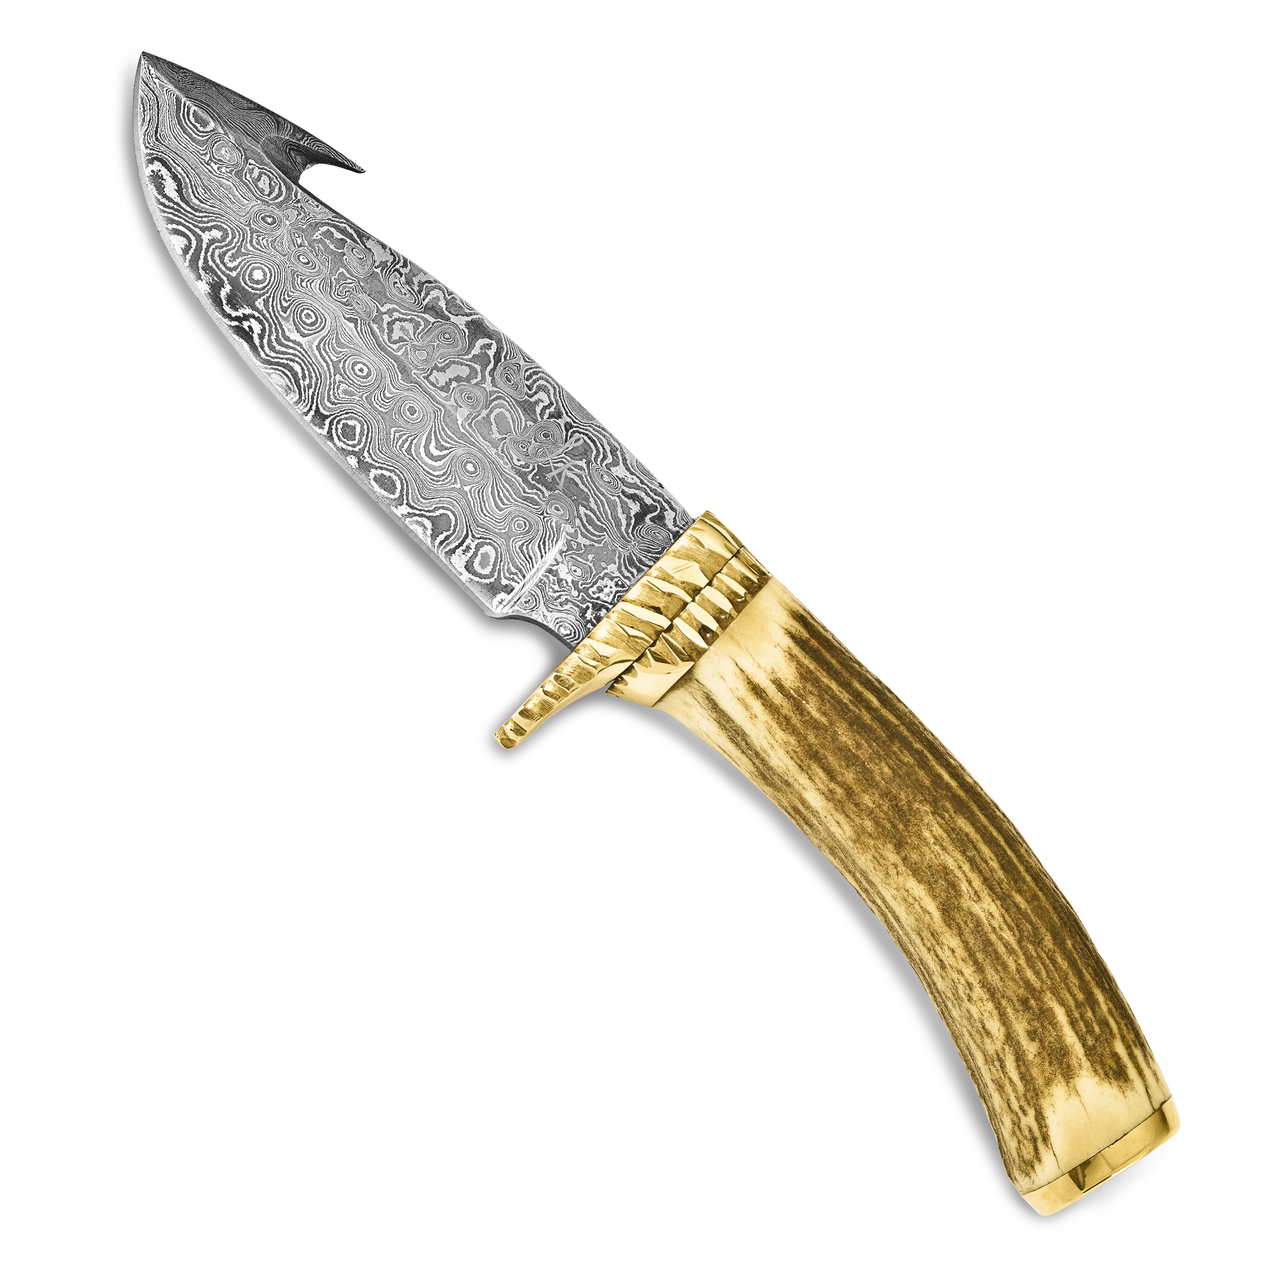 Blade Staghorn Handle Brass Guard Knife Damascus Steel 256 Layer Fixed by Jere